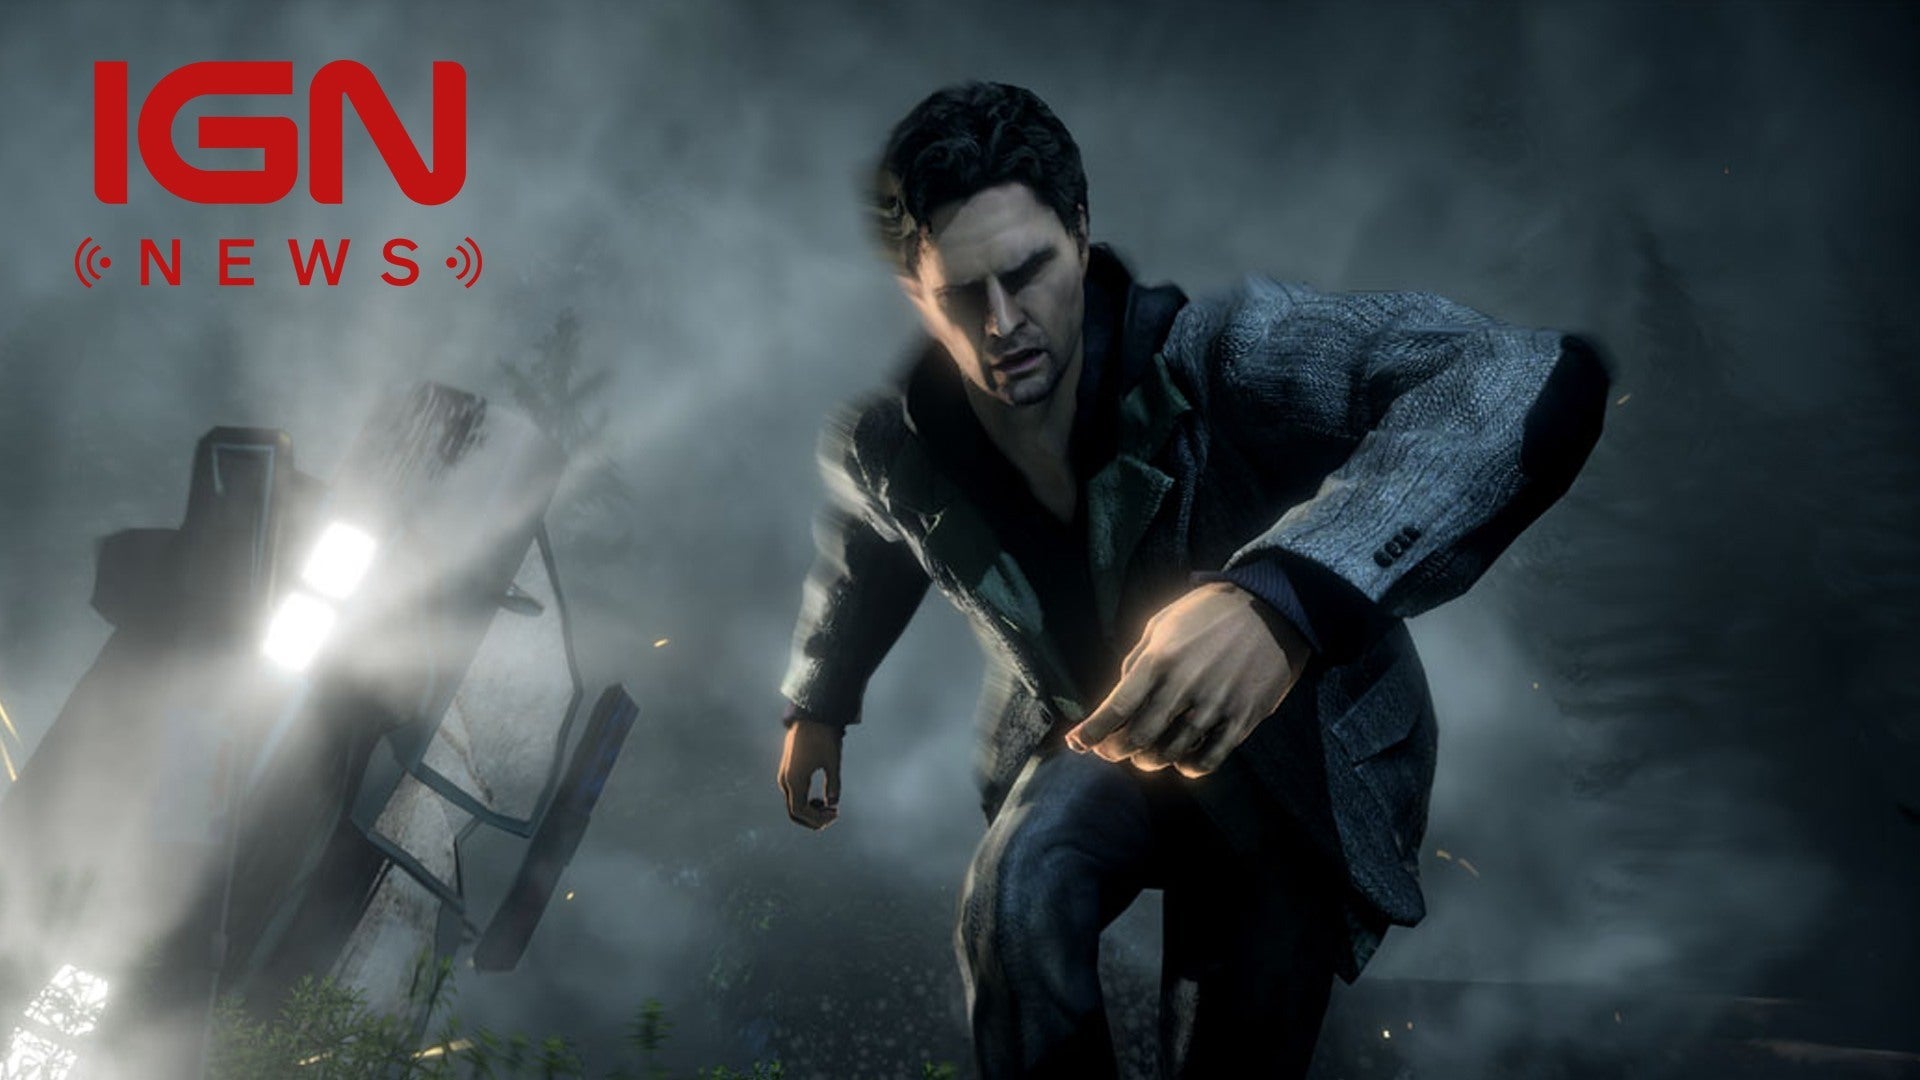 Alan Wake 2 Doesn't Compromise on the Horror, Sam Lake Says